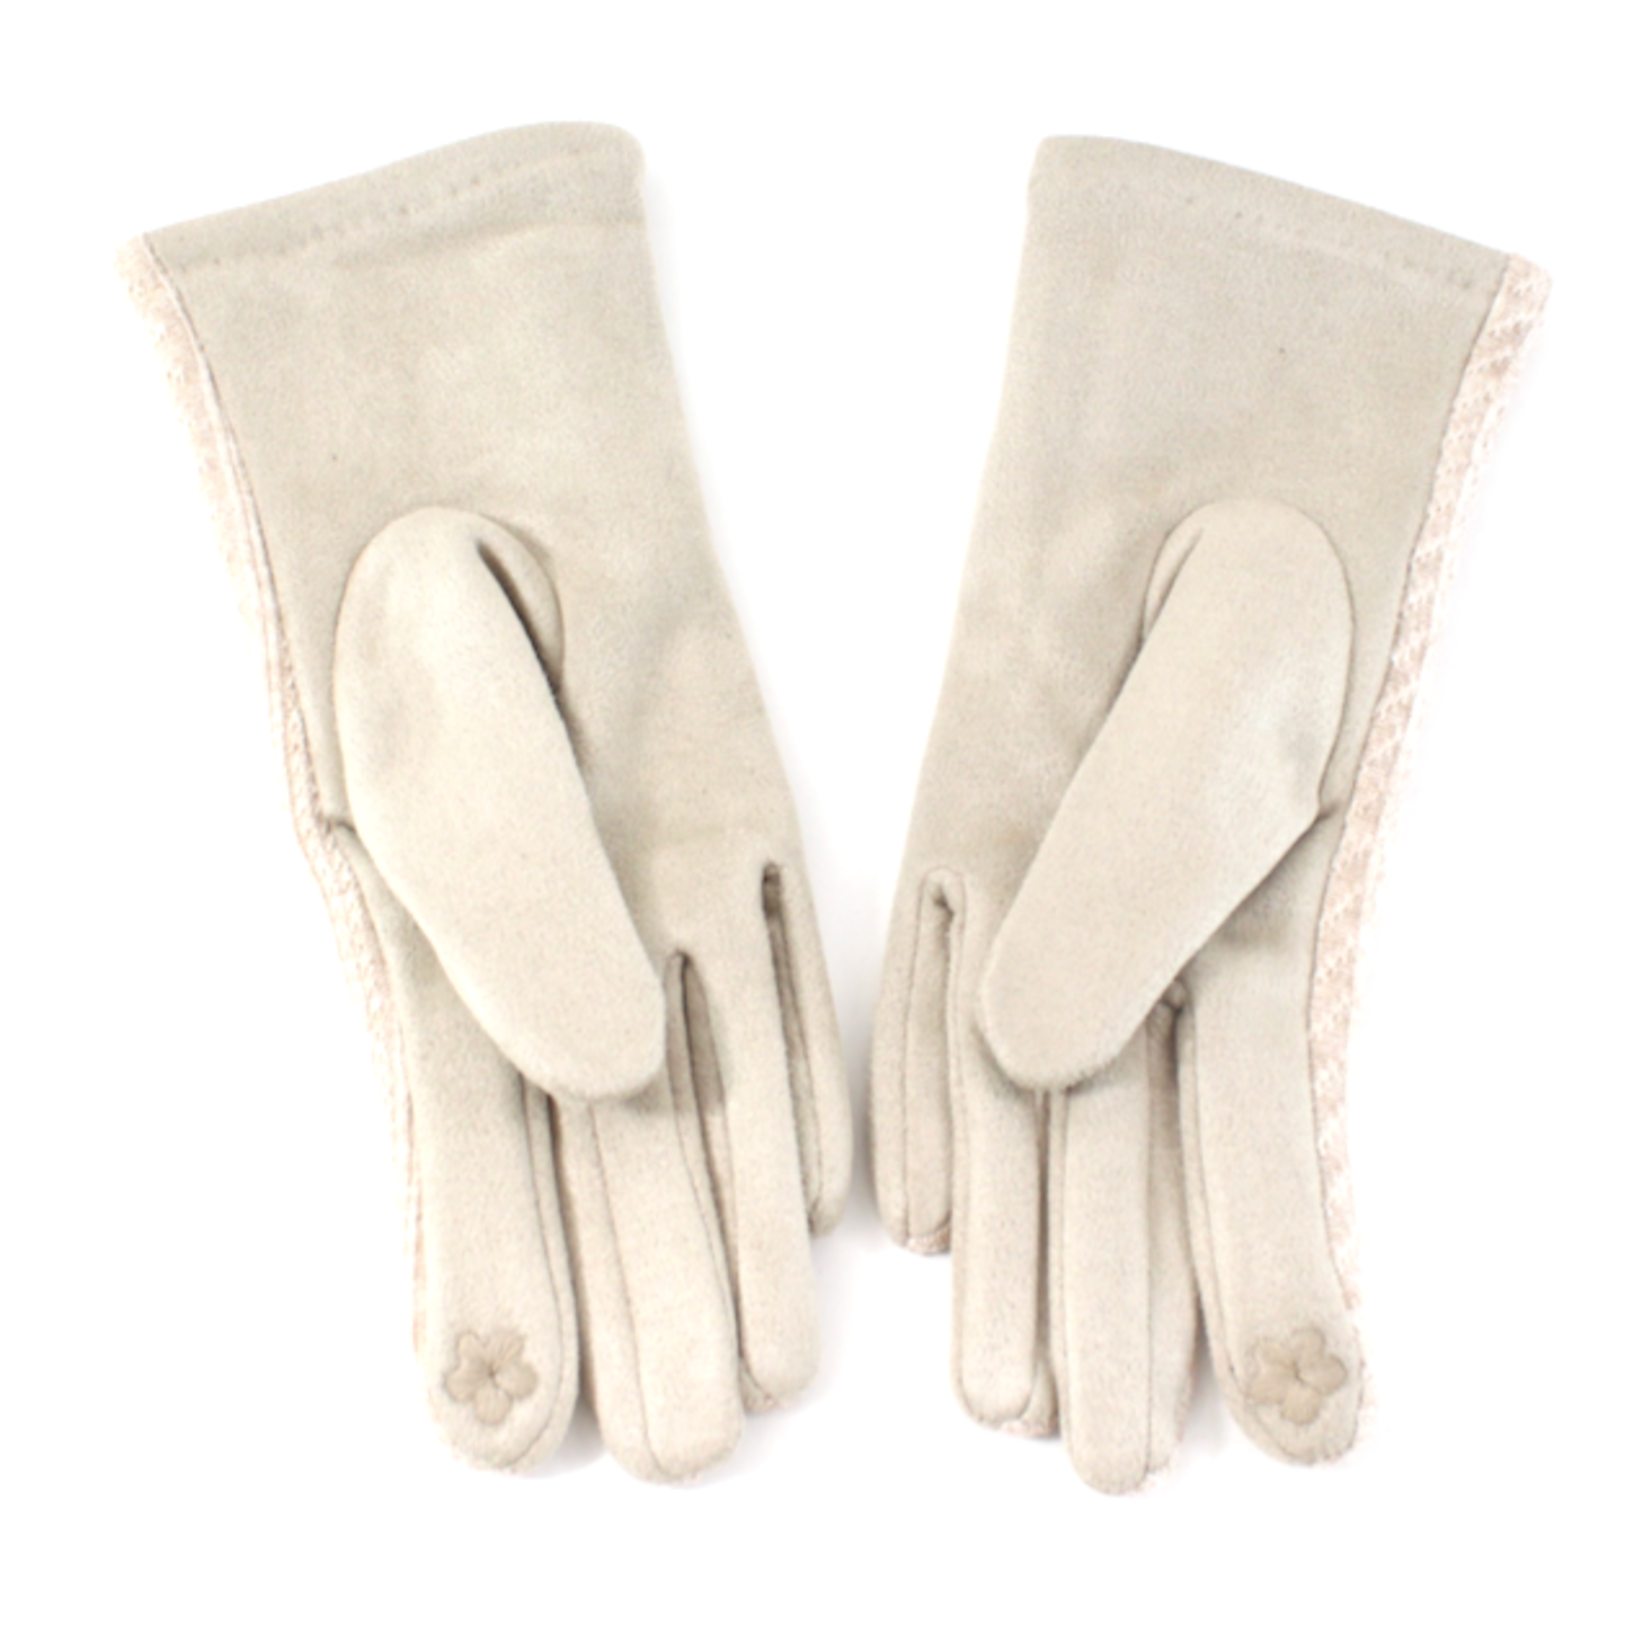 Pretty Persuasions 3 Button Patterned Top Touchscreen Gloves in Beige